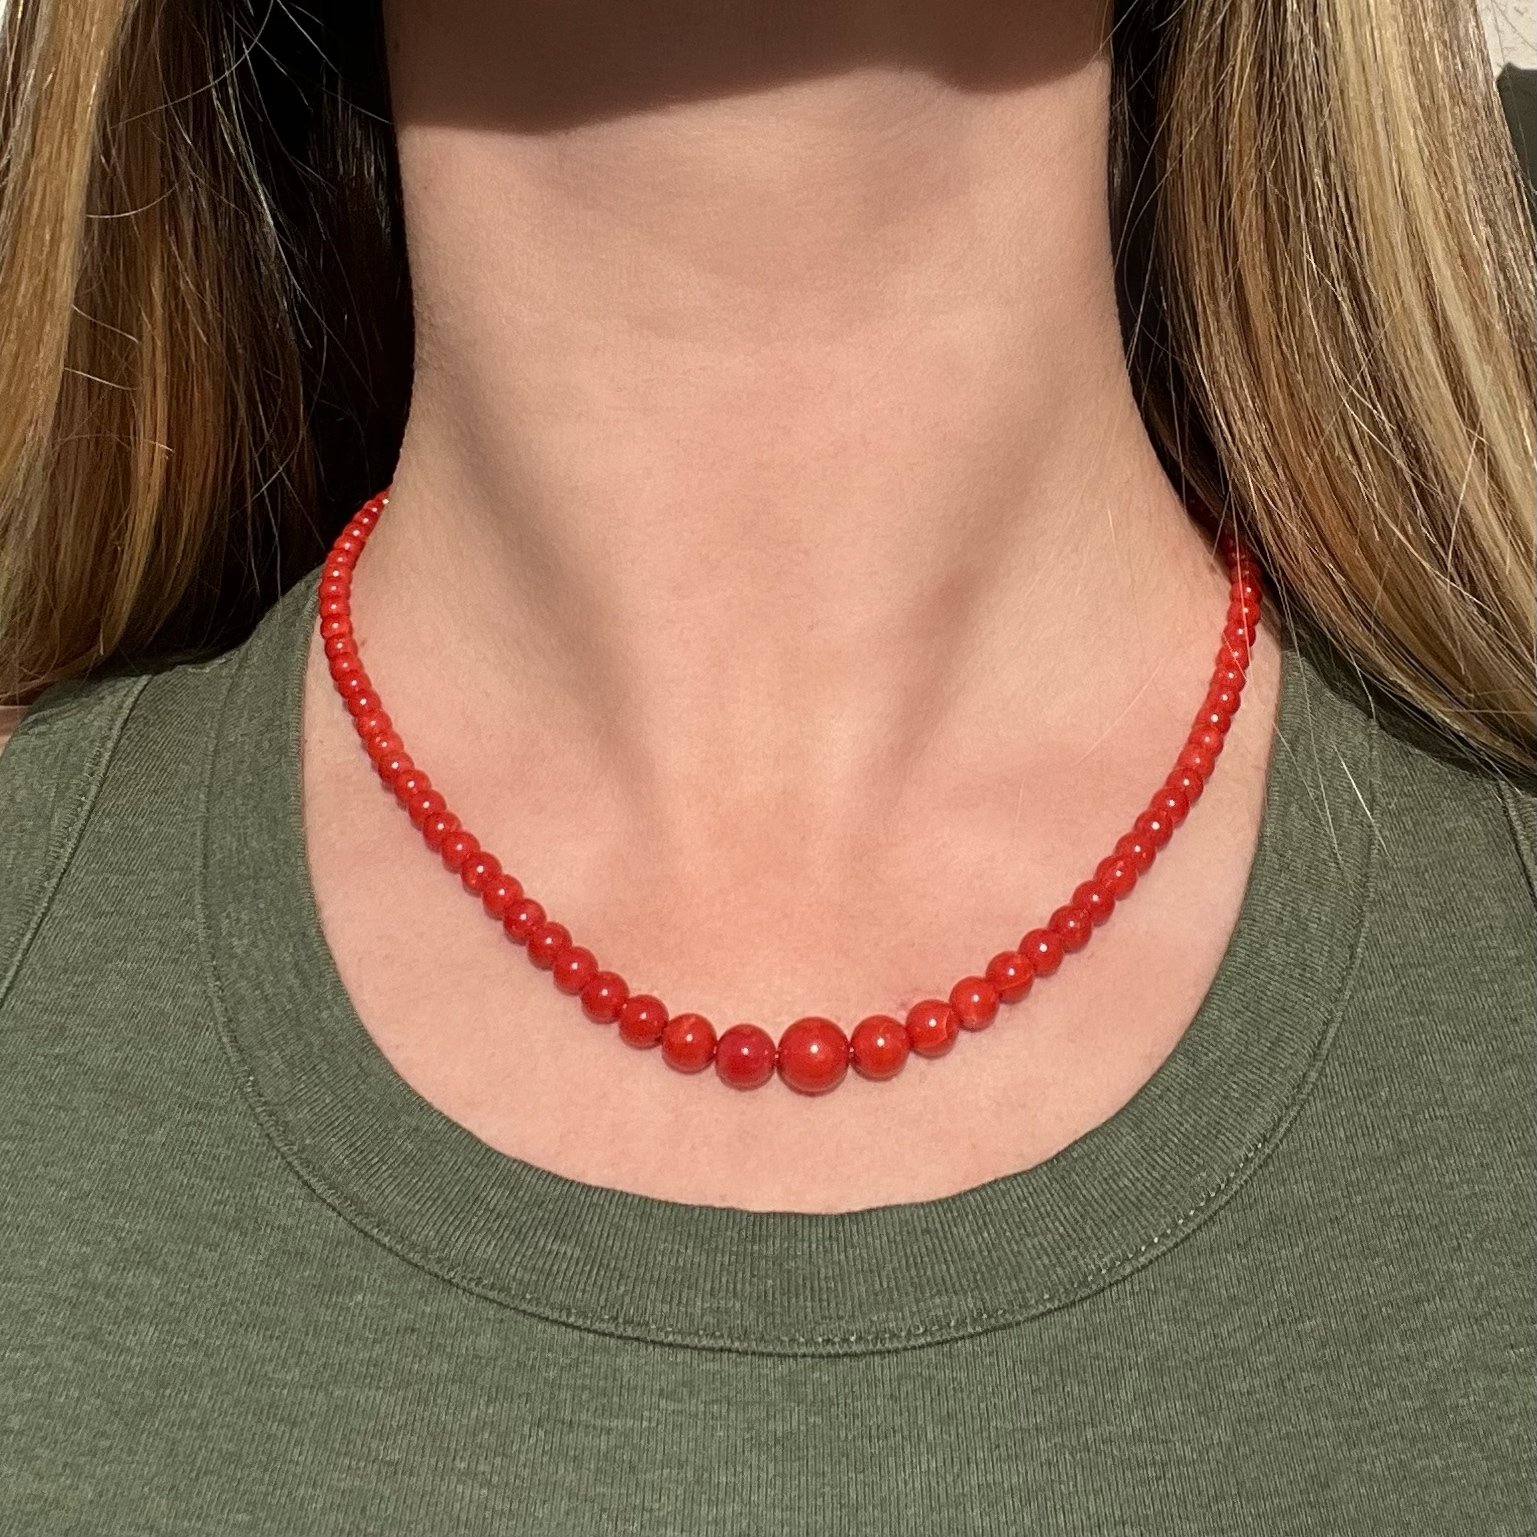 18K YG Red Coral Strand Necklace 3.9 - 9.3mm 19.4g, 19"